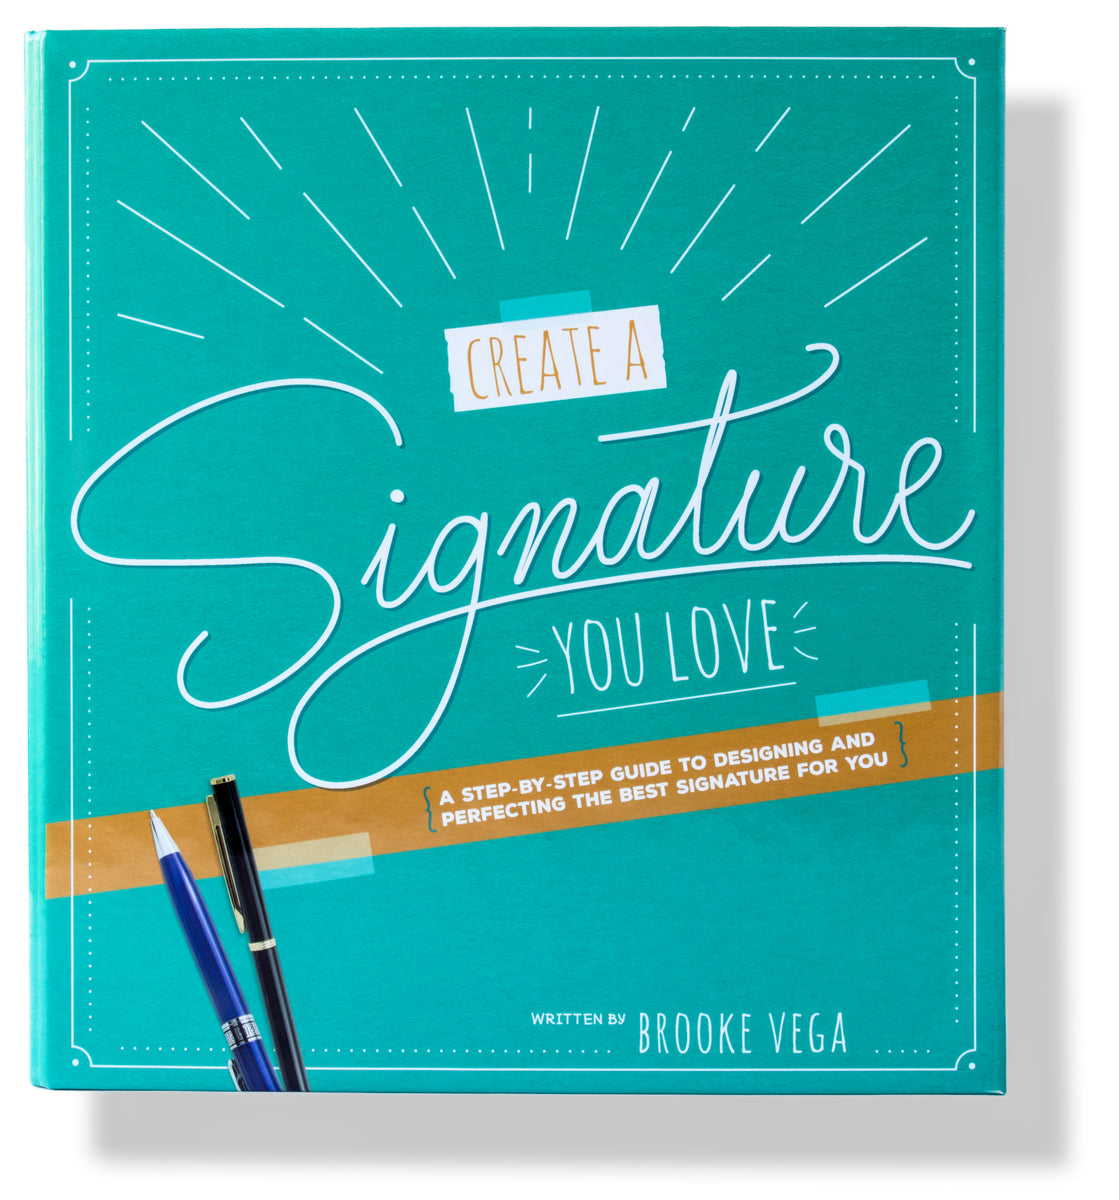 Image of the front cover of the Create a Signature You Love guide and workbook